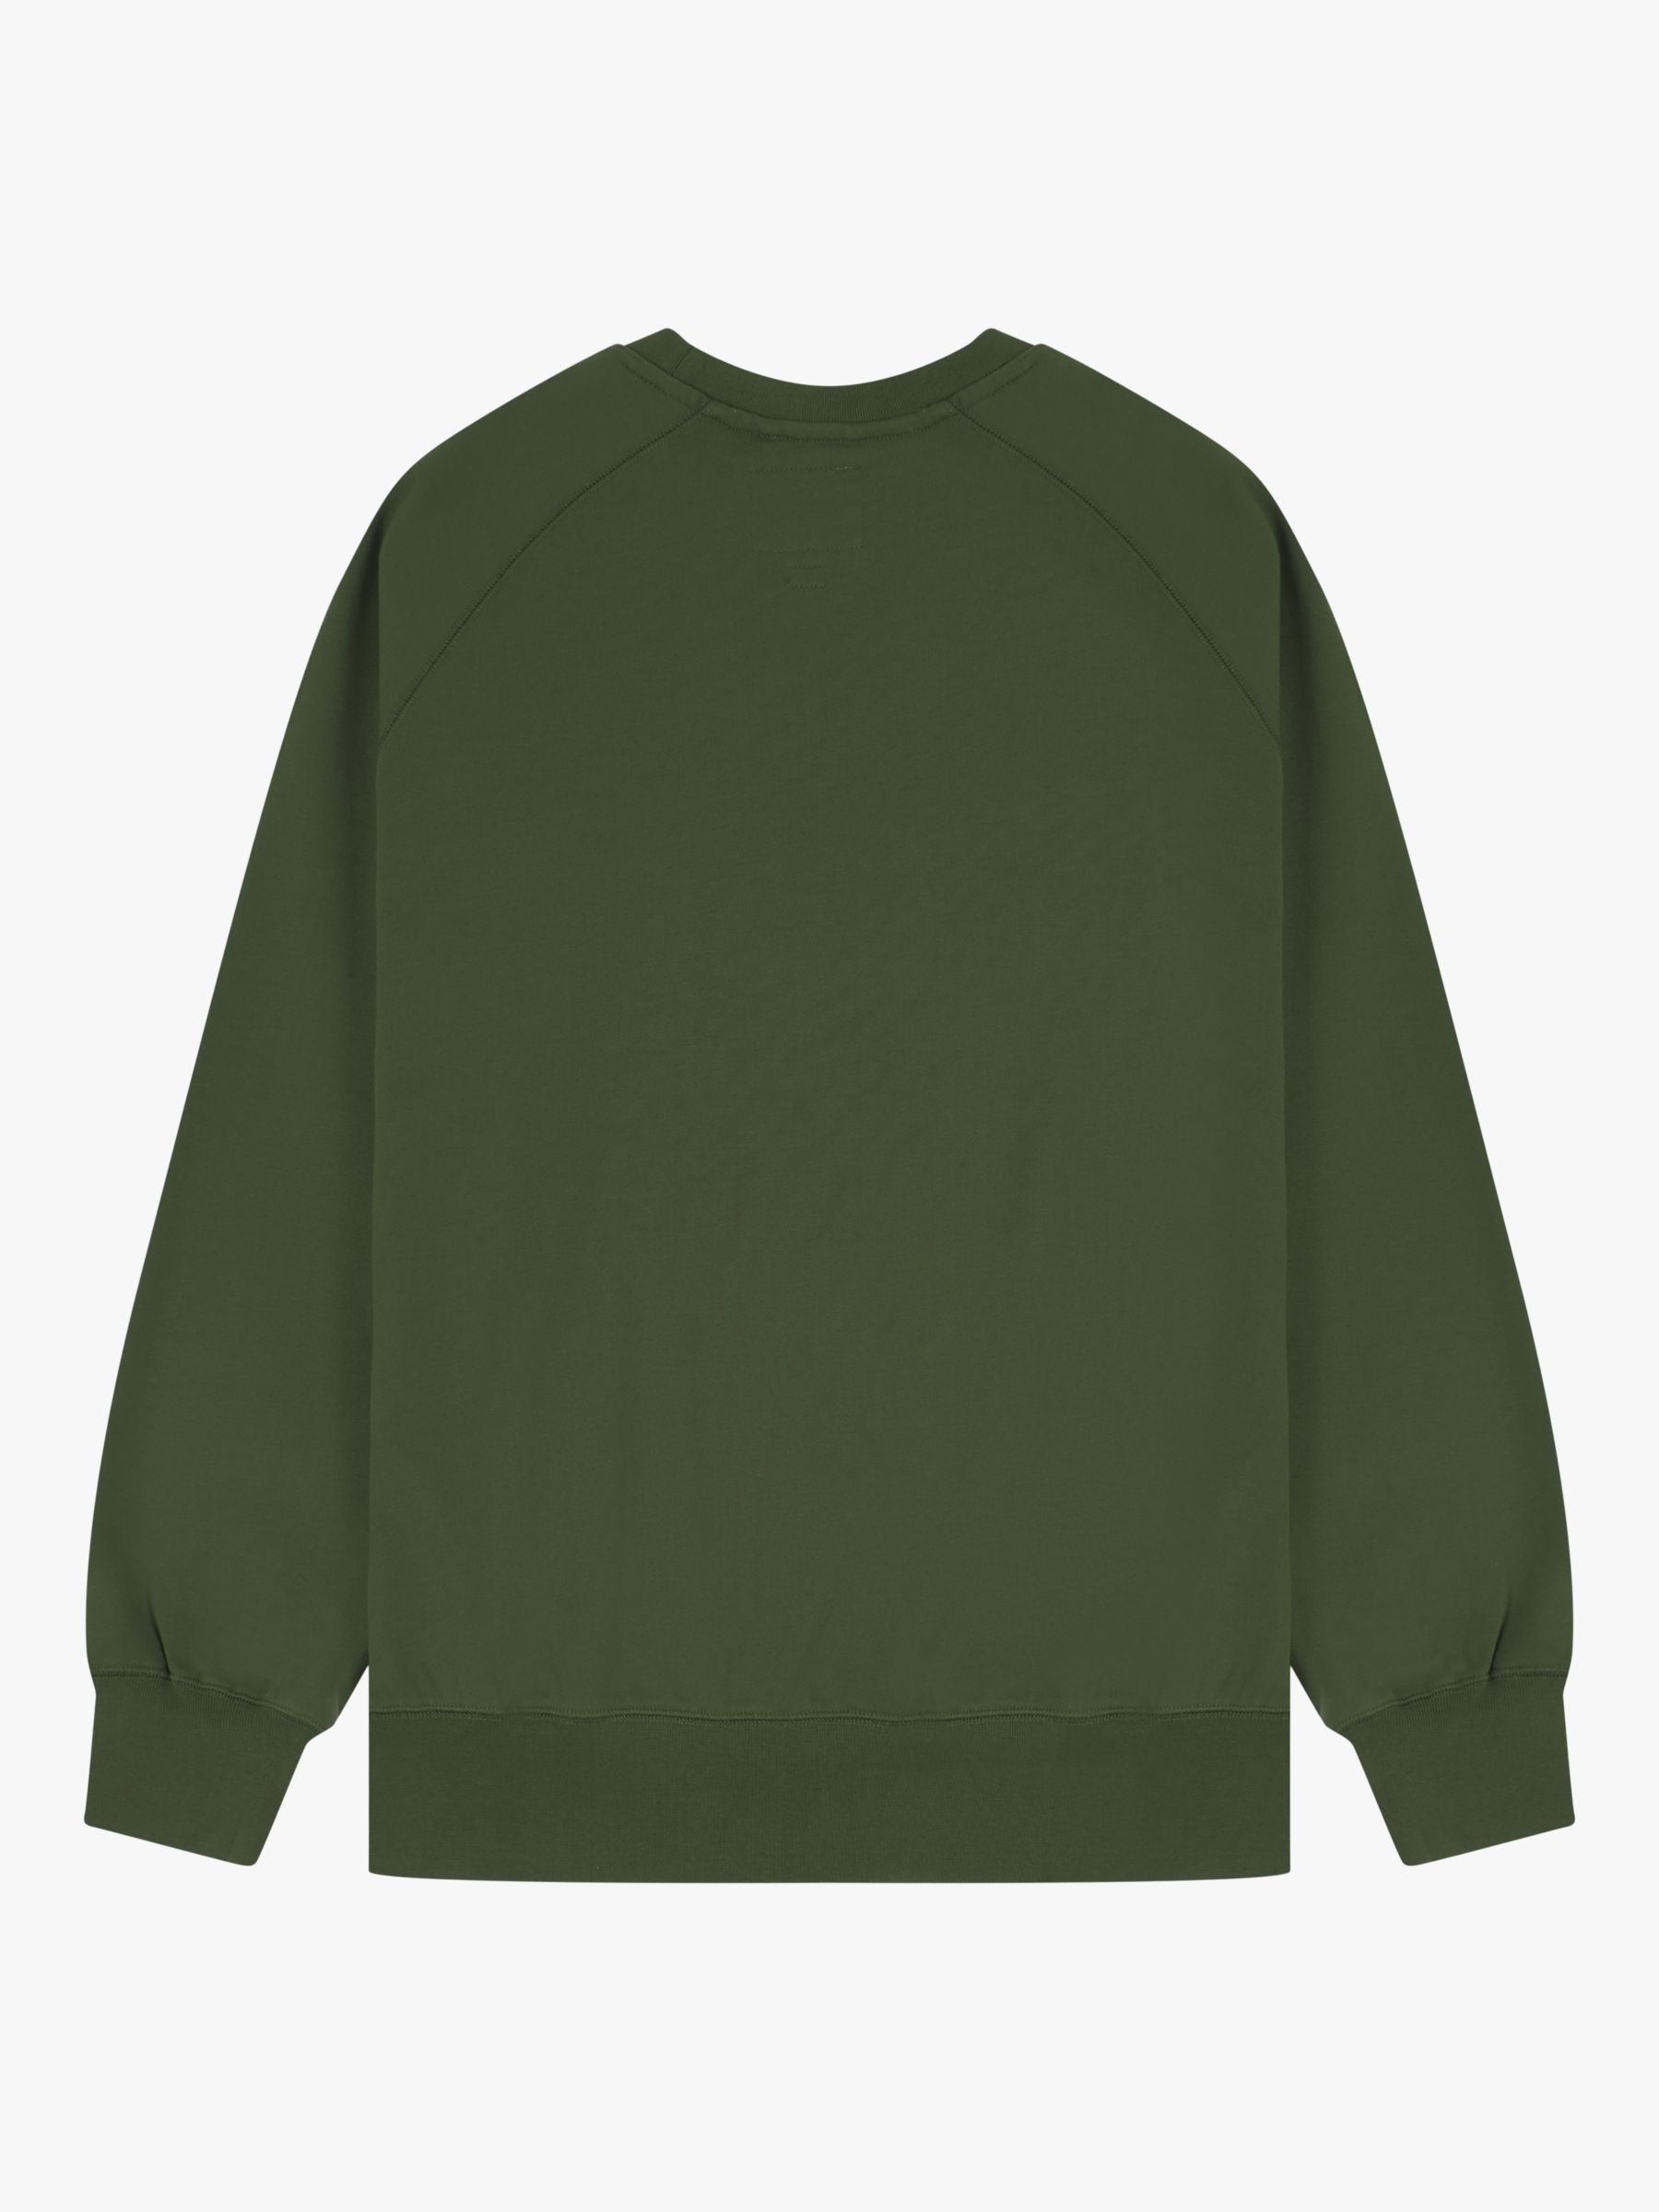 Buy Uskees Organic Cotton Crew Jumper Online at johnlewis.com